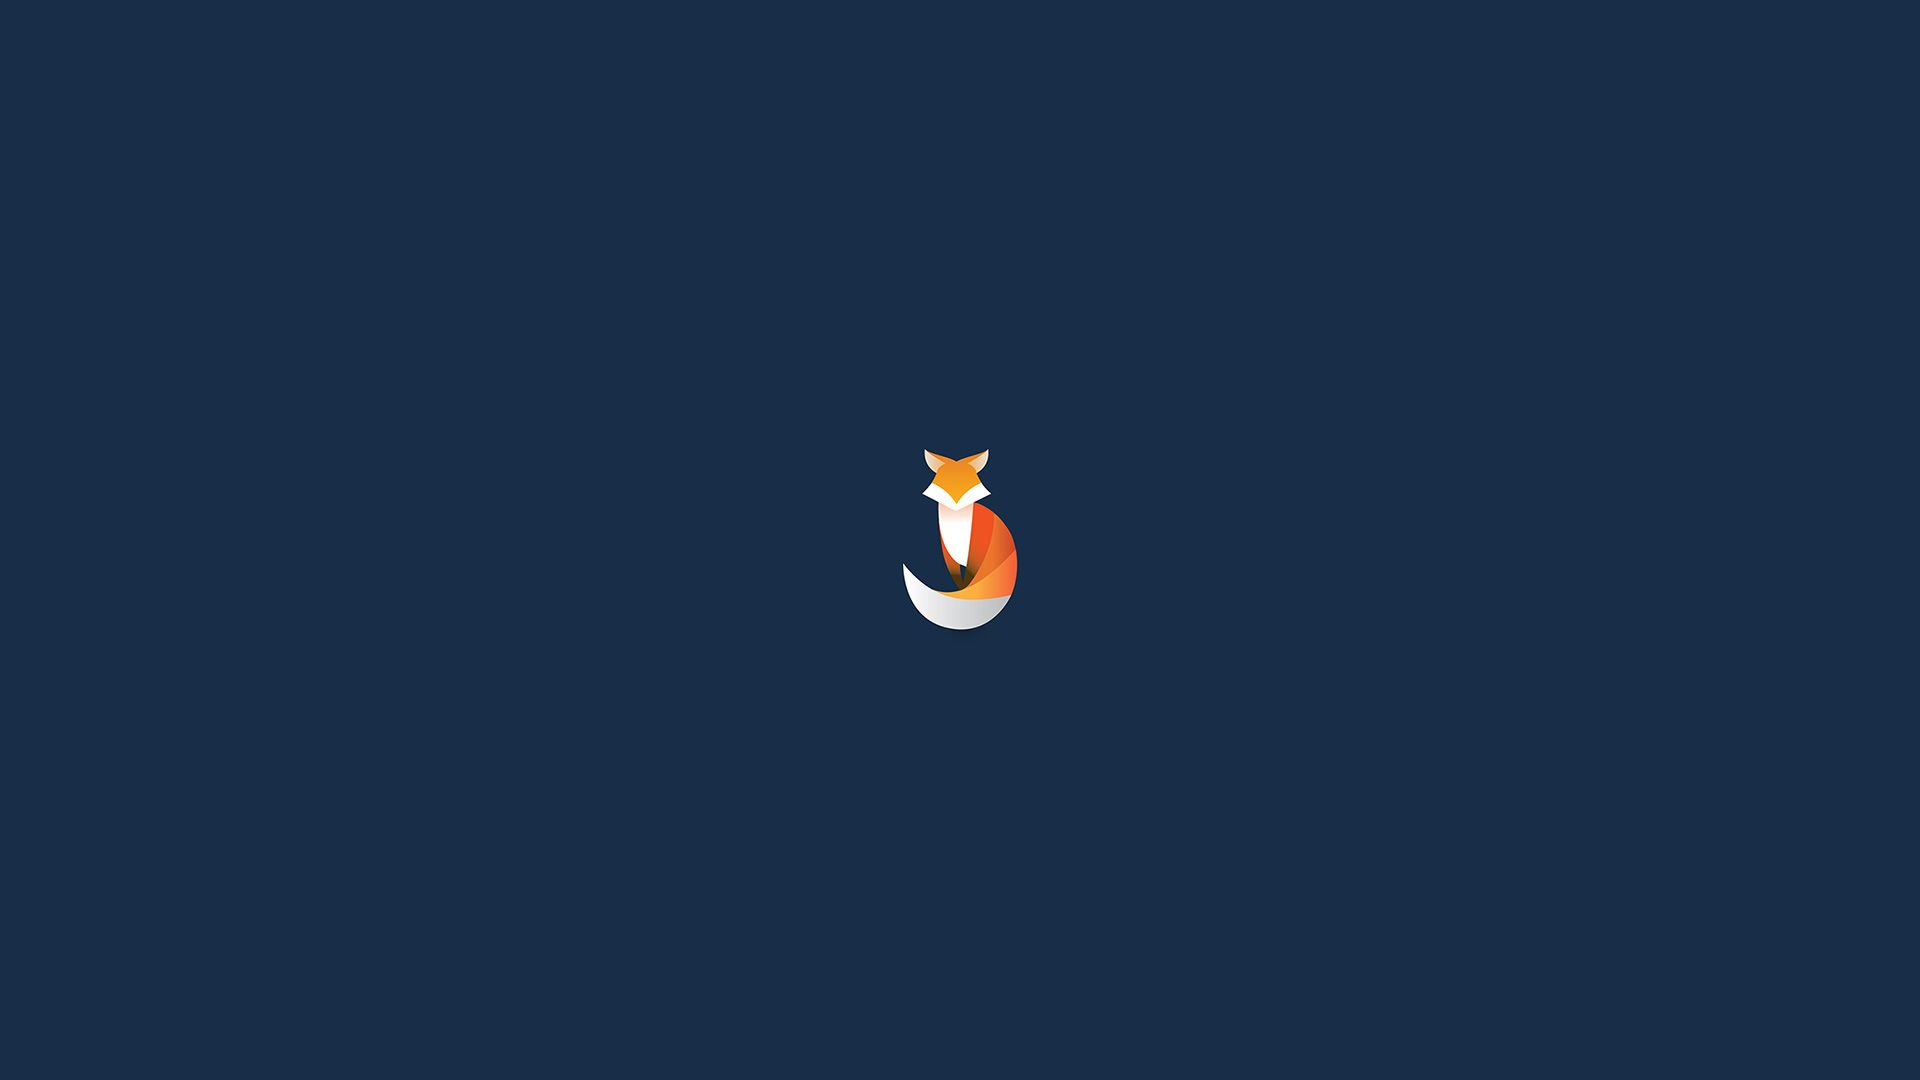 Fox Logo Minimalism, HD Artist, 4k Wallpaper, Image, Background, Photo and Picture